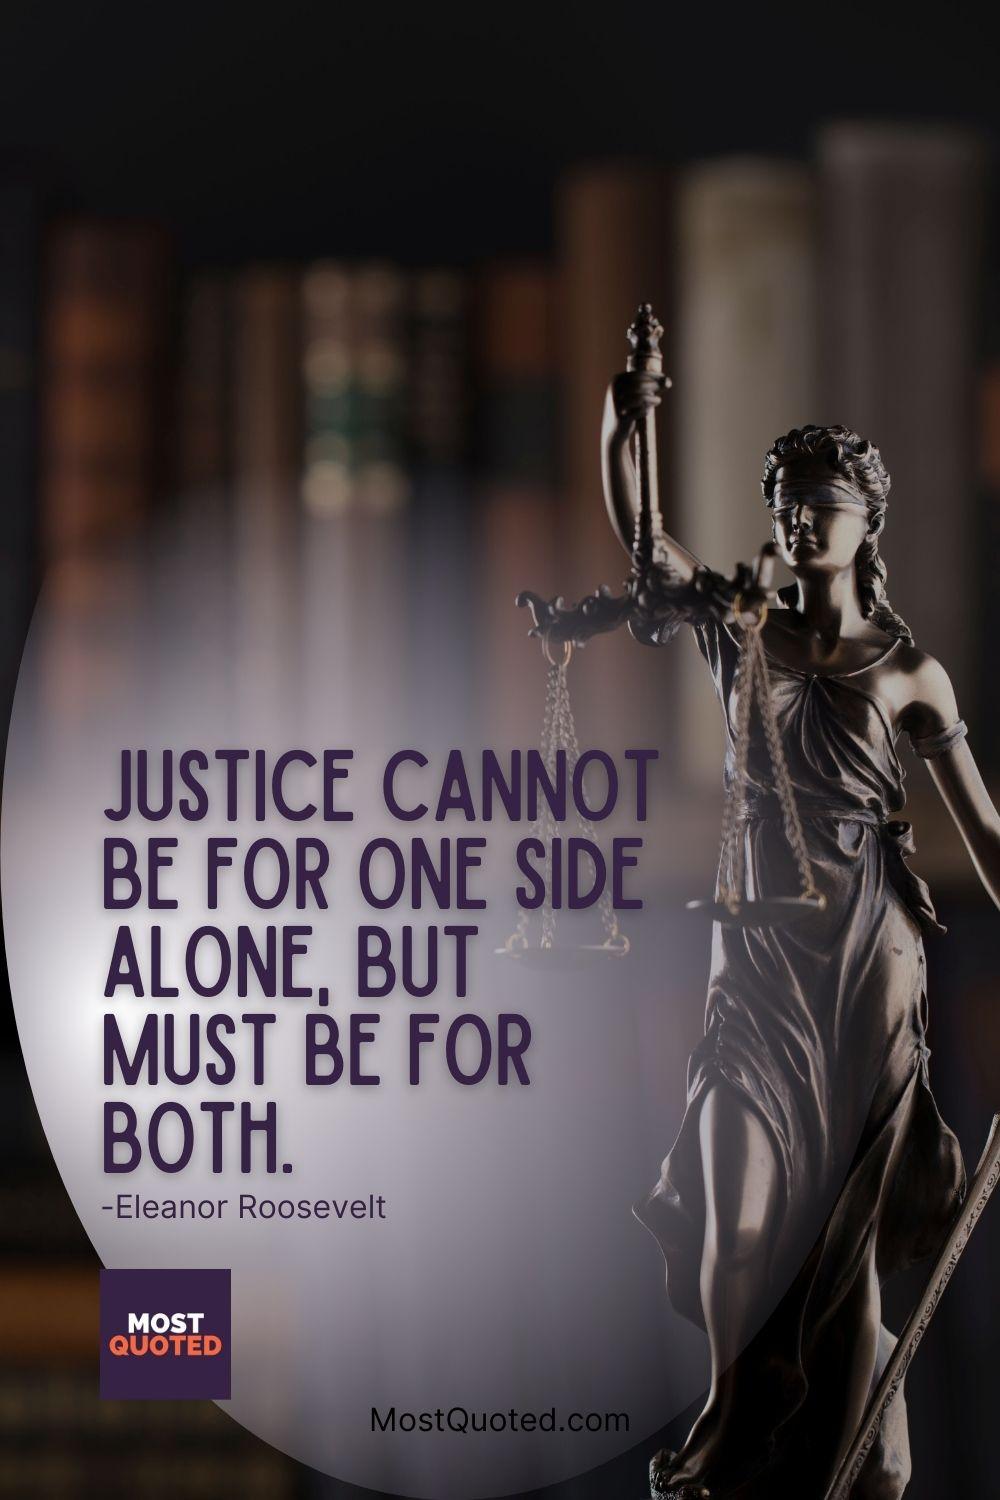 Justice cannot be for one side alone, but must be for both. - Eleanor Roosevelt